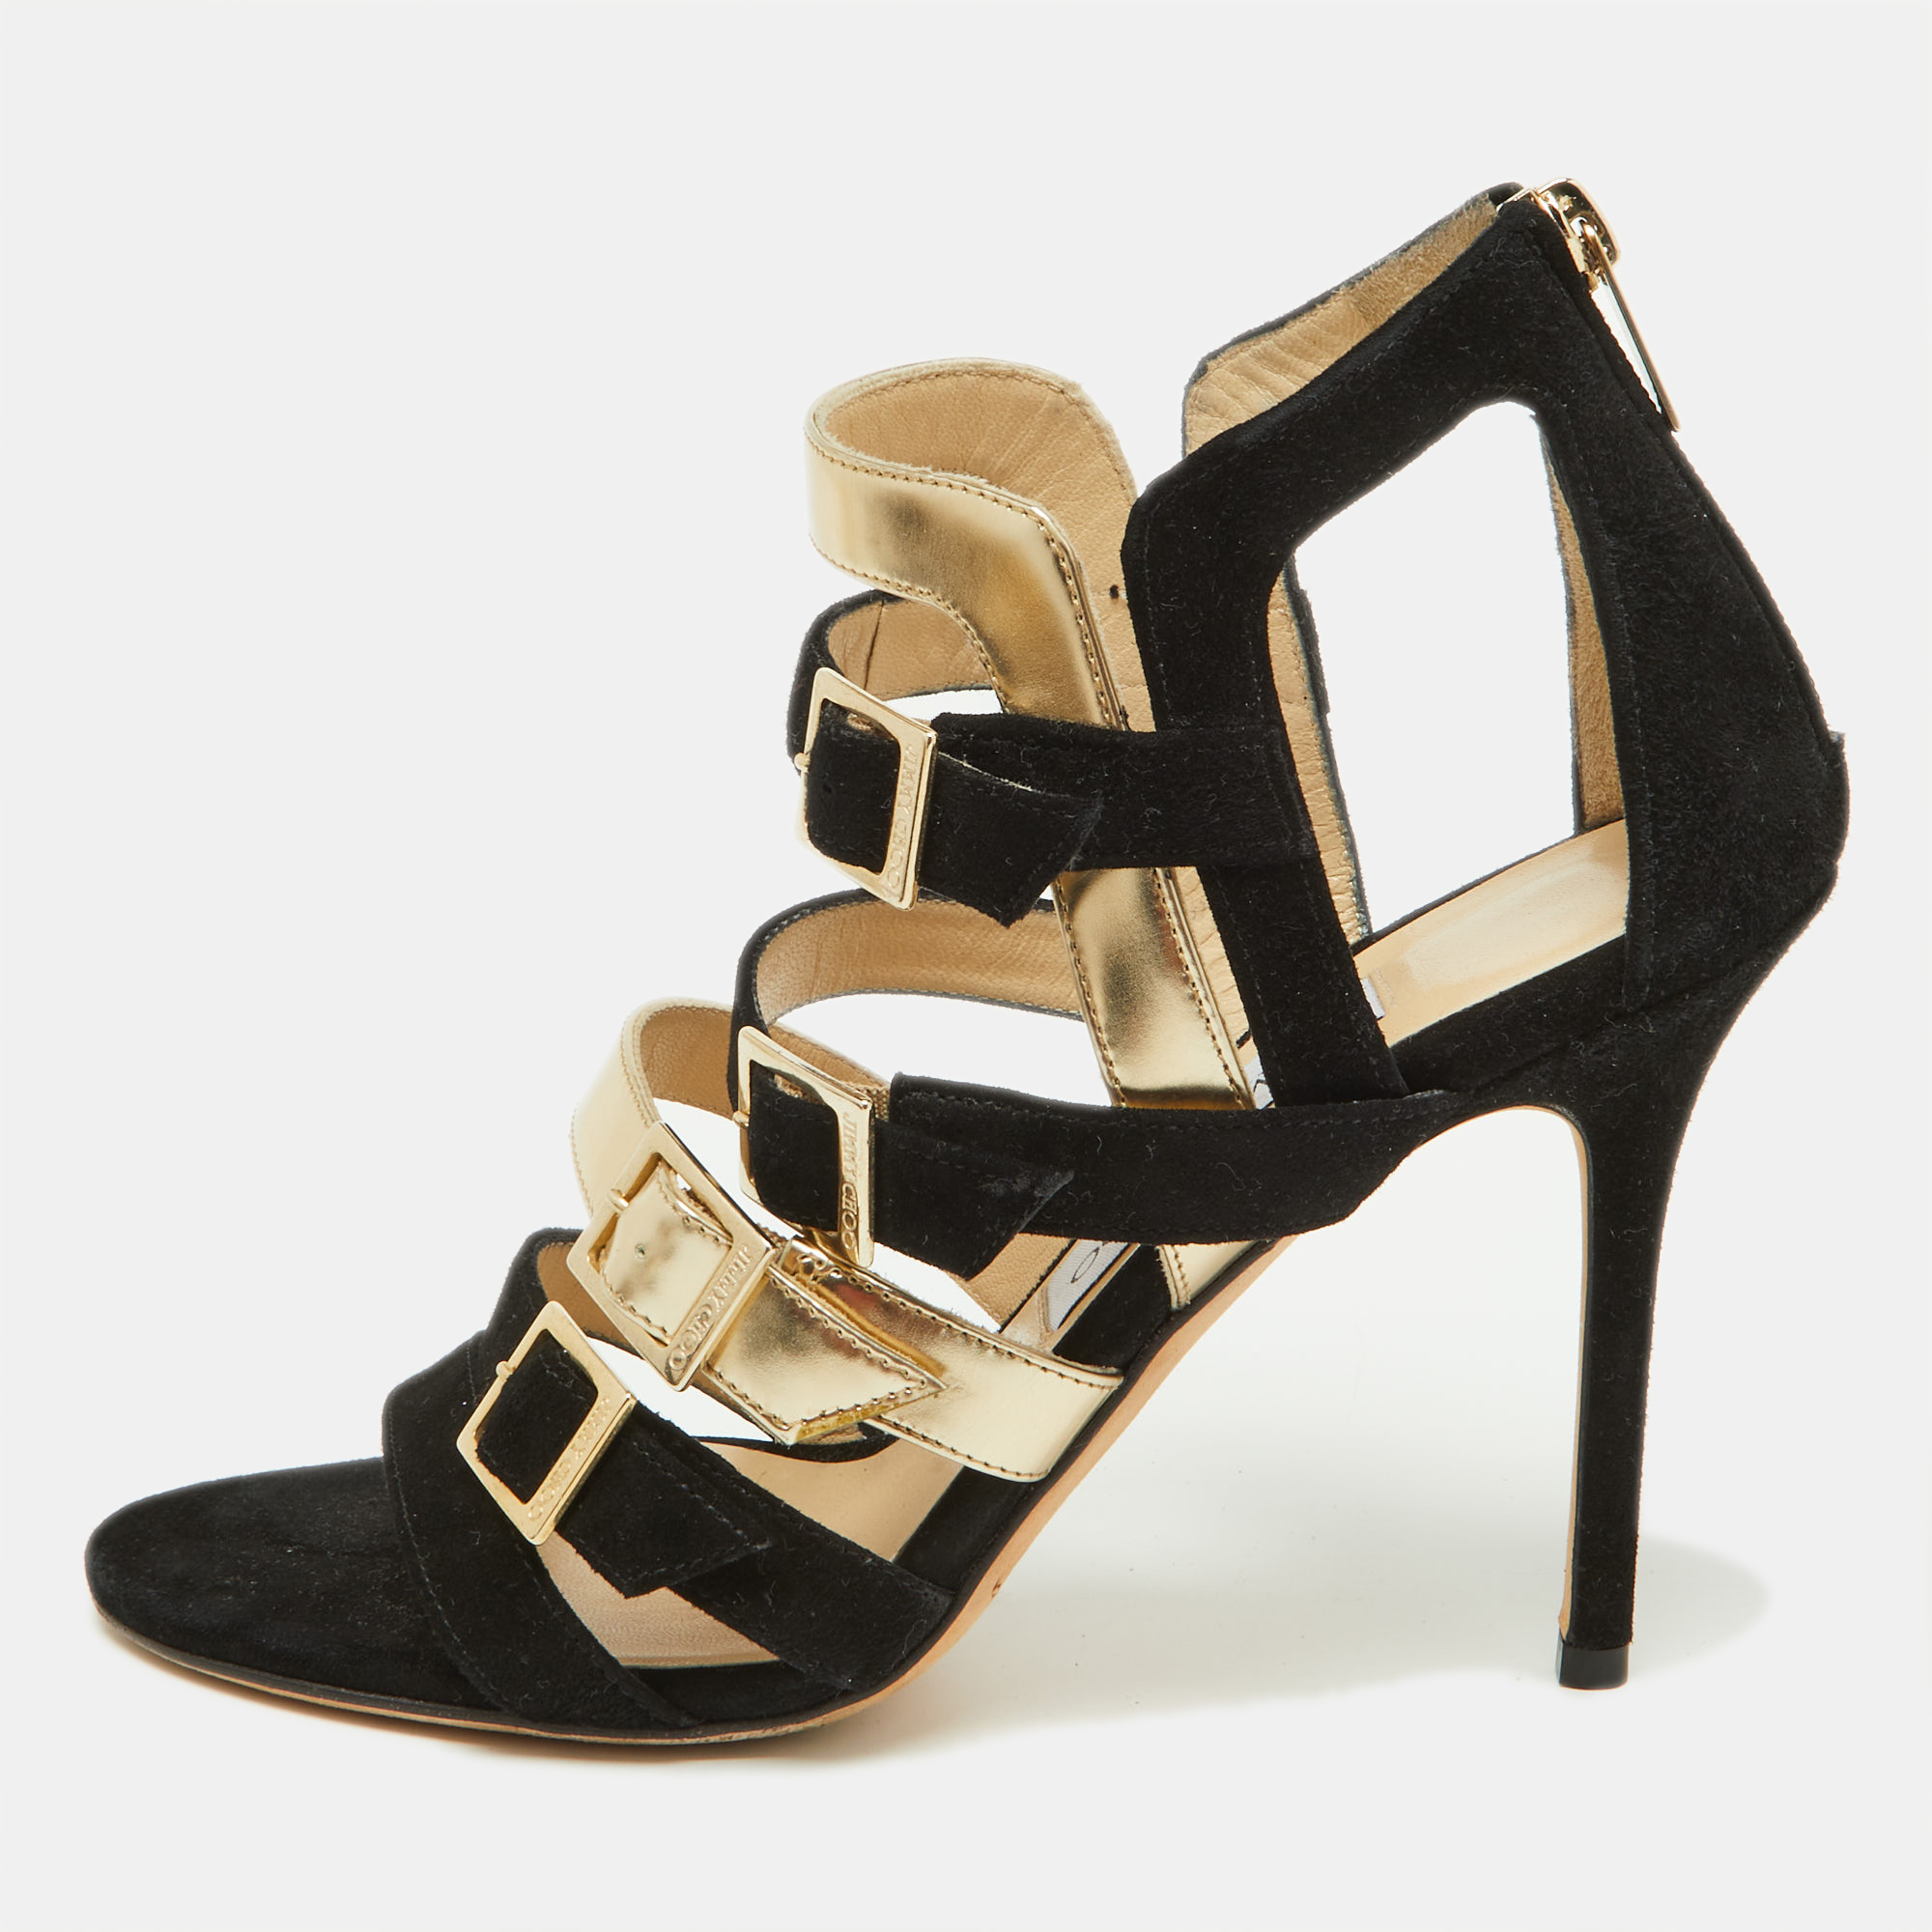 Pre-owned Jimmy Choo Black/gold Suede And Patent Leather Booster Gladiator Sandals Size 38.5